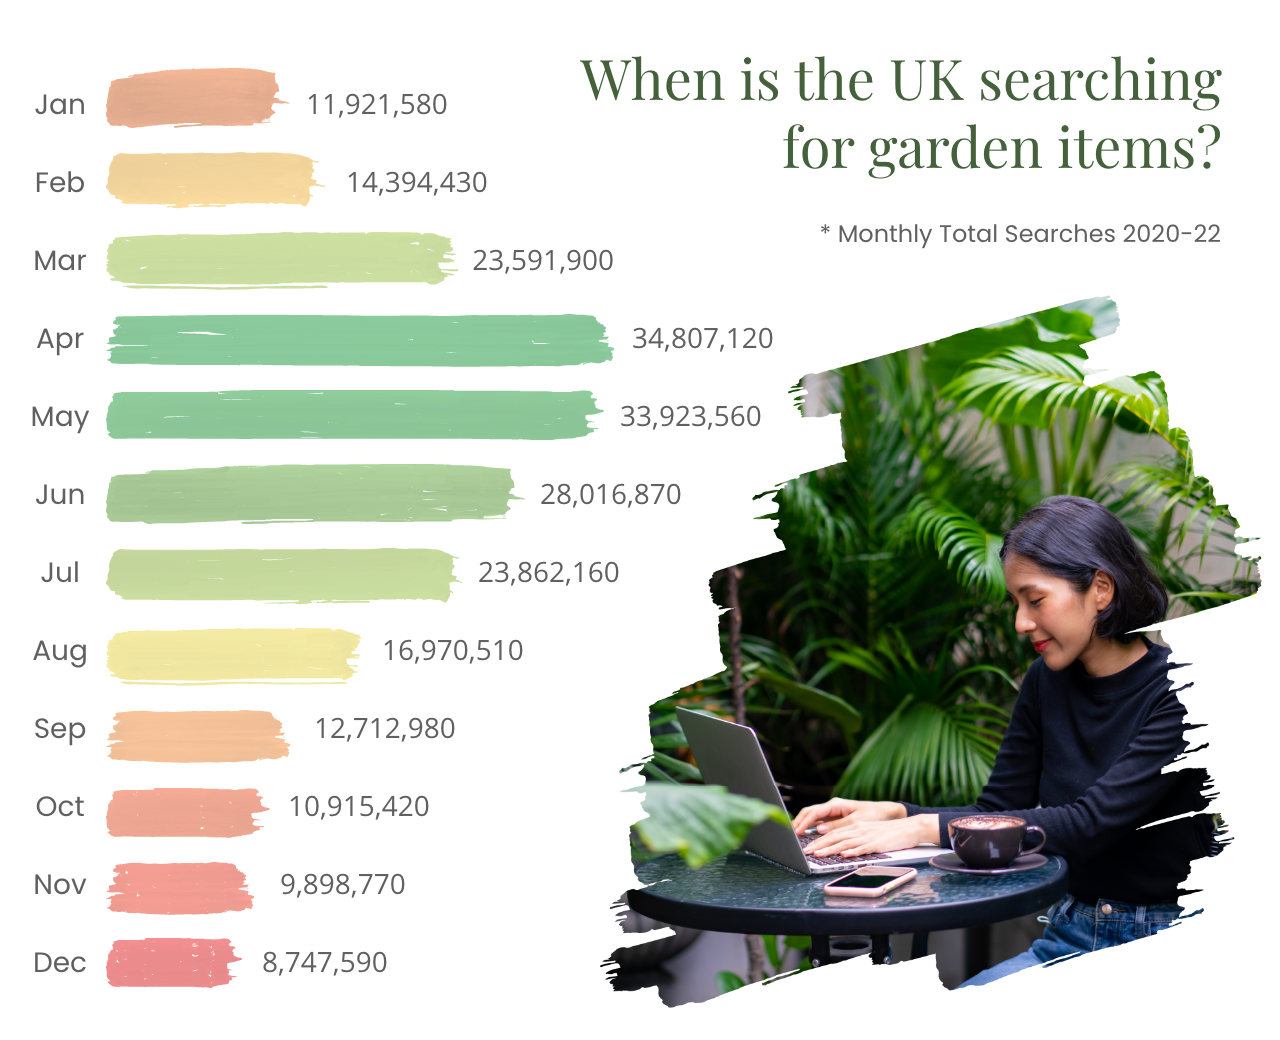 When are Brits searching for garden items ÔÇô stock photo alt